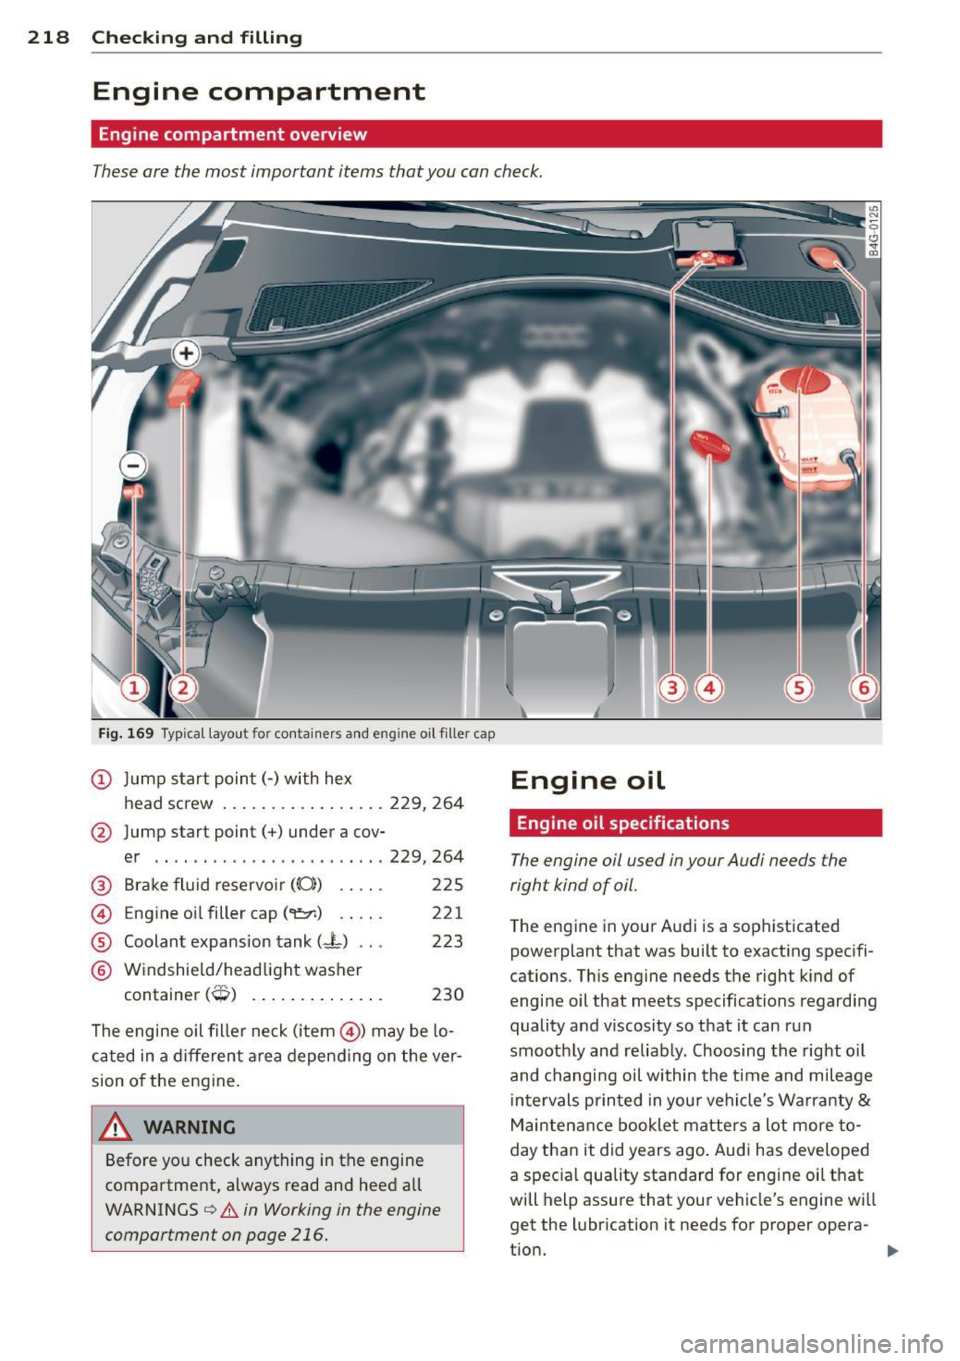 AUDI S7 2012  Owners Manual 218  Checking  and  filling 
Engine  compartment 
Engine compartment  overview 
These are the  most  important  items  that you  can check. 
Fig. 169 Typ ical  layout  for  contai ners  and  eng ine  